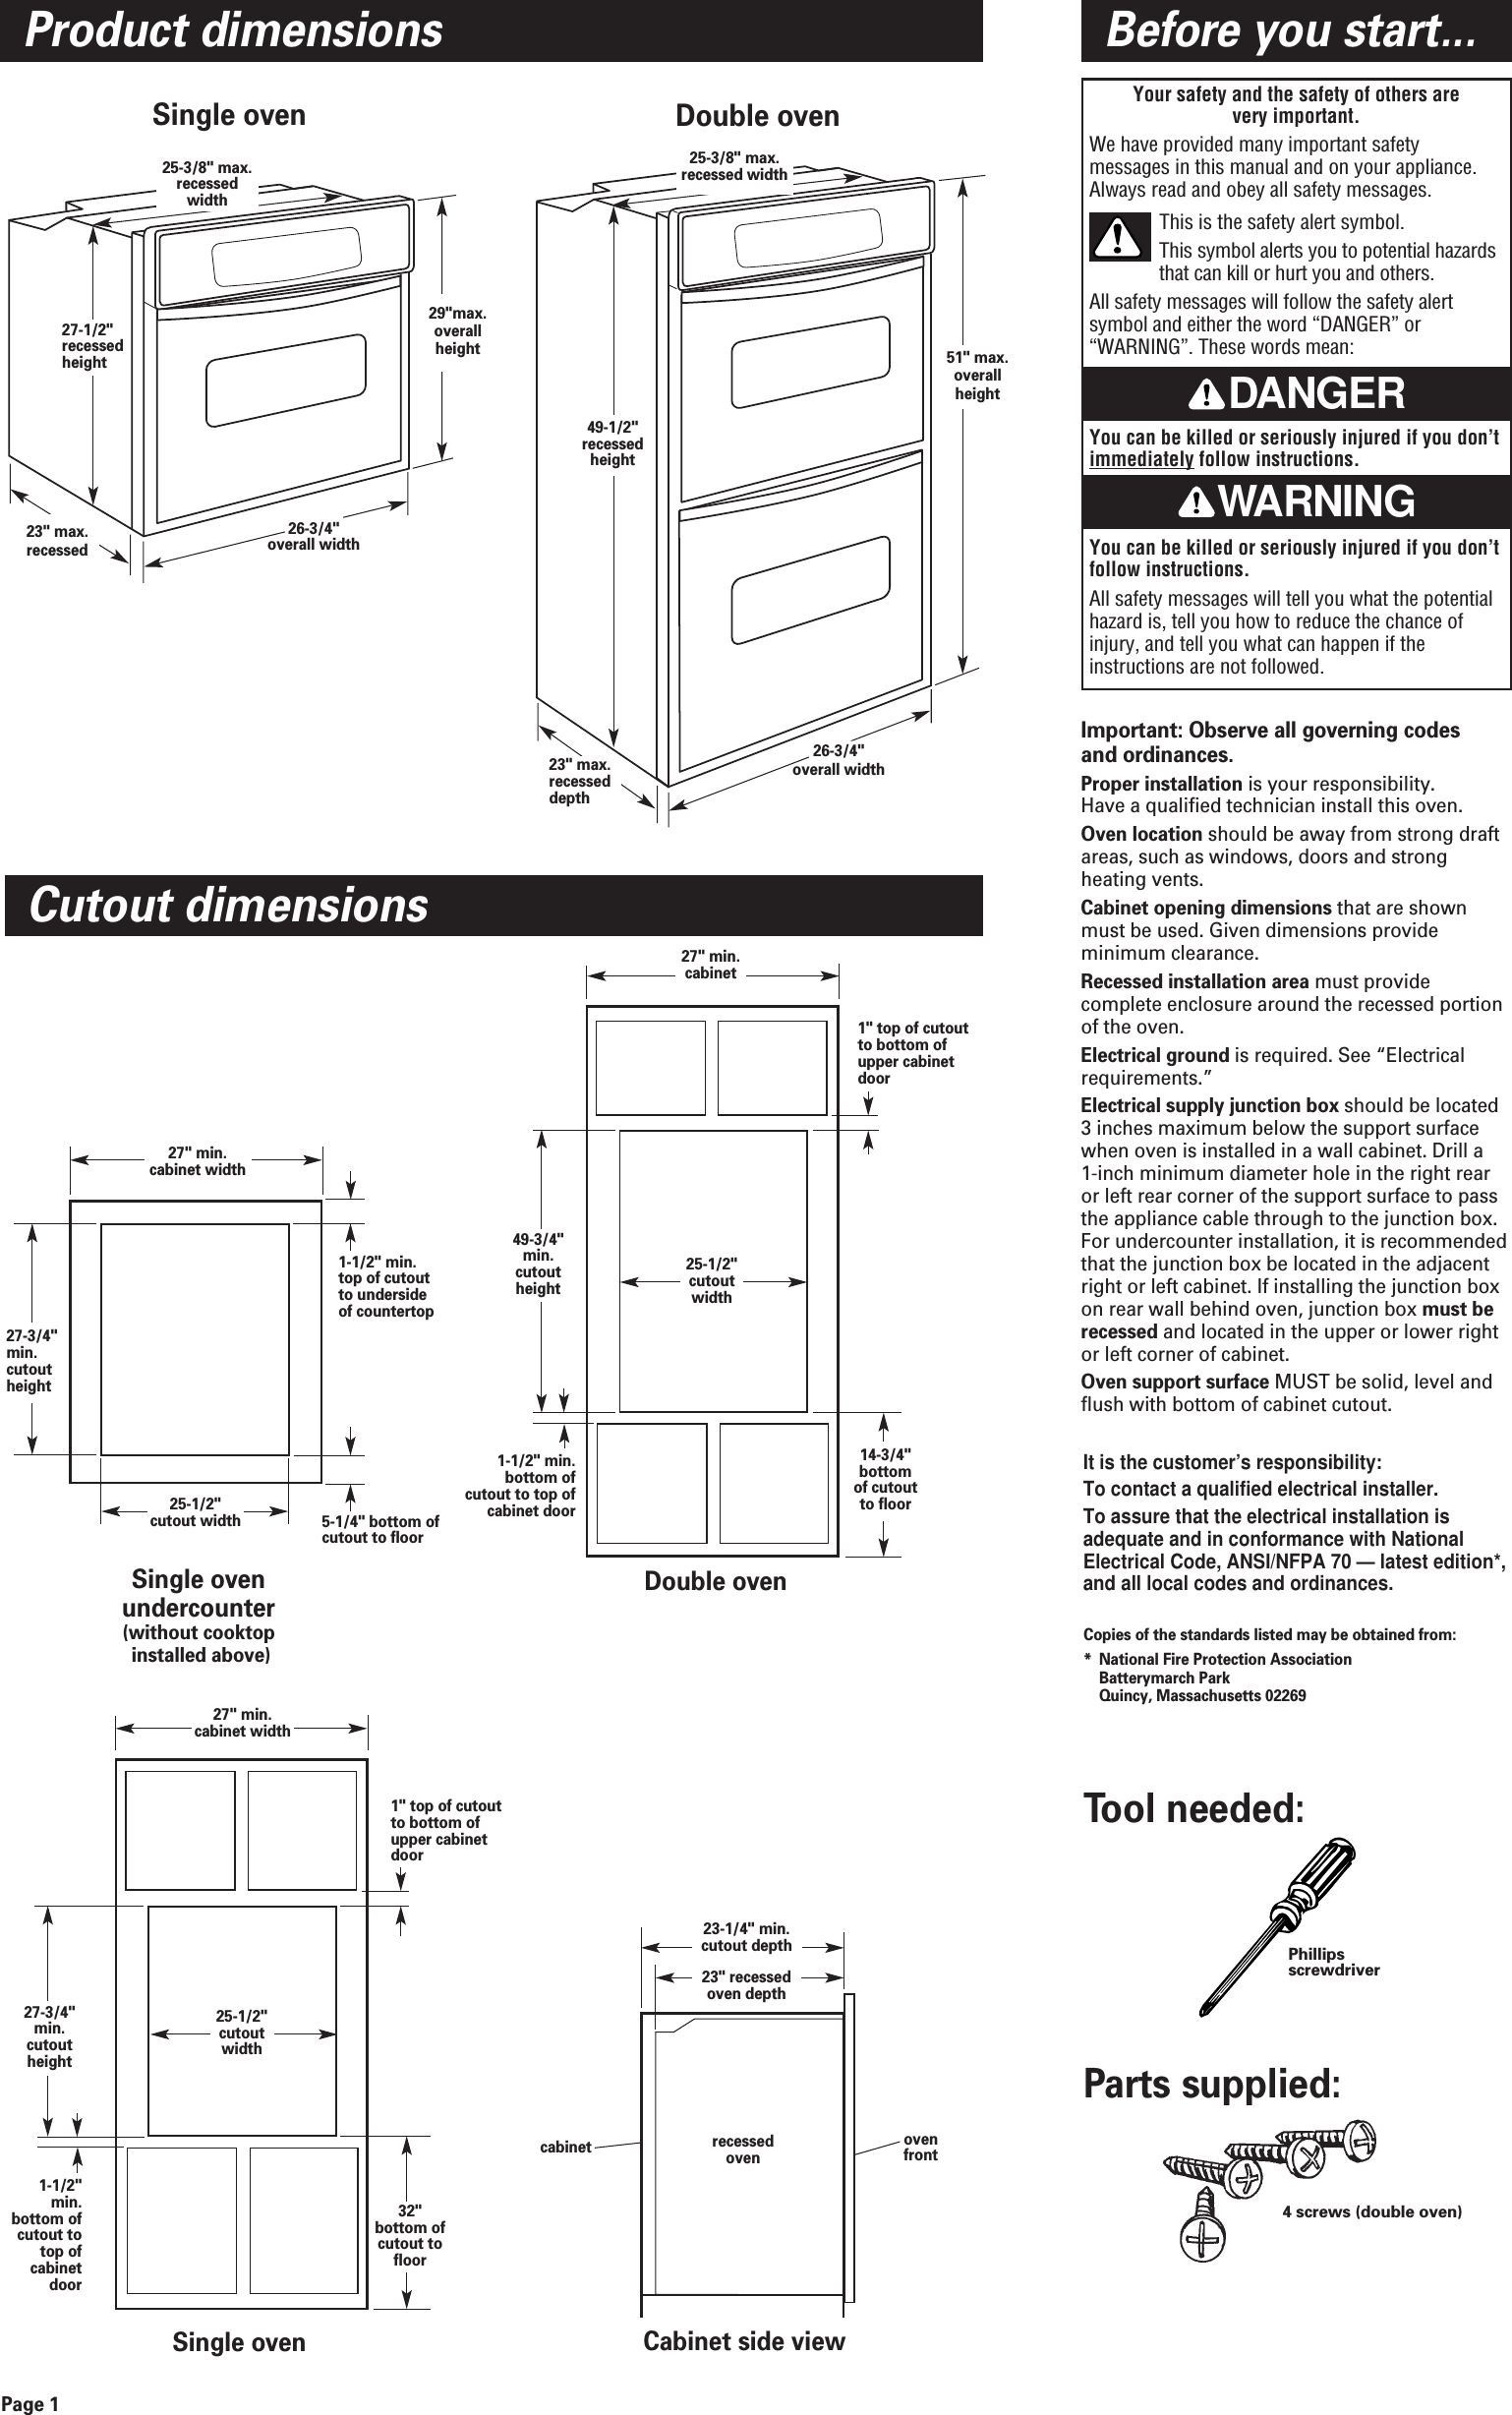 Page 14 screws (double oven)PhillipsscrewdriverProduct dimensionsCutout dimensionsBefore you start...49-1/2&quot;recessedheight51&quot; max.overallheight25-3/8&quot; max. recessed width23&quot; max.recesseddepthDouble ovenSingle oven27-1/2&quot;recessedheight25-3/8&quot; max.recessedwidth23&quot; max.recessed29&quot;max.overallheight27&quot; min.cabinet1&quot; top of cutoutto bottom ofupper cabinetdoor27&quot; min.cabinet width27&quot; min.cabinet width25-1/2&quot;cutoutwidth25-1/2&quot;cutoutwidth49-3/4&quot;min.cutoutheight14-3/4&quot;bottomof cutoutto floor1-1/2&quot; min.bottom ofcutout to top ofcabinet door25-1/2&quot;cutout width 5-1/4&quot; bottom ofcutout to floor27-3/4&quot;min.cutoutheight1-1/2&quot; min.top of cutoutto undersideof countertop1&quot; top of cutoutto bottom ofupper cabinetdoor1-1/2&quot;min.bottom ofcutout totop ofcabinetdoor32&quot;bottom ofcutout tofloorSingle oven undercounter(without cooktopinstalled above)Double ovenCabinet side viewSingle oven27-3/4&quot;min.cutoutheight23-1/4&quot; min.cutout depth23&quot; recessedoven depthrecessed ovencabinet ovenfrontImportant: Observe all governing codes and ordinances.Proper installation is your responsibility. Have a qualified technician install this oven. Oven location should be away from strong draftareas, such as windows, doors and strongheating vents.Cabinet opening dimensions that are shownmust be used. Given dimensions provideminimum clearance. Recessed installation area must providecomplete enclosure around the recessed portionof the oven.Electrical ground is required. See “Electricalrequirements.”Electrical supply junction box should be located3 inches maximum below the support surfacewhen oven is installed in a wall cabinet. Drill a 1-inch minimum diameter hole in the right rearor left rear corner of the support surface to passthe appliance cable through to the junction box.For undercounter installation, it is recommendedthat the junction box be located in the adjacentright or left cabinet. If installing the junction boxon rear wall behind oven, junction box must berecessed and located in the upper or lower rightor left corner of cabinet.Oven support surface MUST be solid, level andflush with bottom of cabinet cutout.Copies of the standards listed may be obtained from:* National Fire Protection AssociationBatterymarch ParkQuincy, Massachusetts 02269Tool needed:Parts supplied:26-3/4&quot;overall width26-3/4&quot;overall widthIt is the customer’s responsibility:To contact a qualified electrical installer.To assure that the electrical installation isadequate and in conformance with NationalElectrical Code, ANSI/NFPA 70 — latest edition*,and all local codes and ordinances.Your safety and the safety of others are very important.We have provided many important safetymessages in this manual and on your appliance.Always read and obey all safety messages.This is the safety alert symbol. This symbol alerts you to potential hazardsthat can kill or hurt you and others. All safety messages will follow the safety alertsymbol and either the word “DANGER” or“WARNING”. These words mean:All safety messages will tell you what the potentialhazard is, tell you how to reduce the chance ofinjury, and tell you what can happen if theinstructions are not followed.You can be killed or seriously injured if you don’timmediately follow instructions.You can be killed or seriously injured if you don’tfollow instructions.WARNINGDANGER